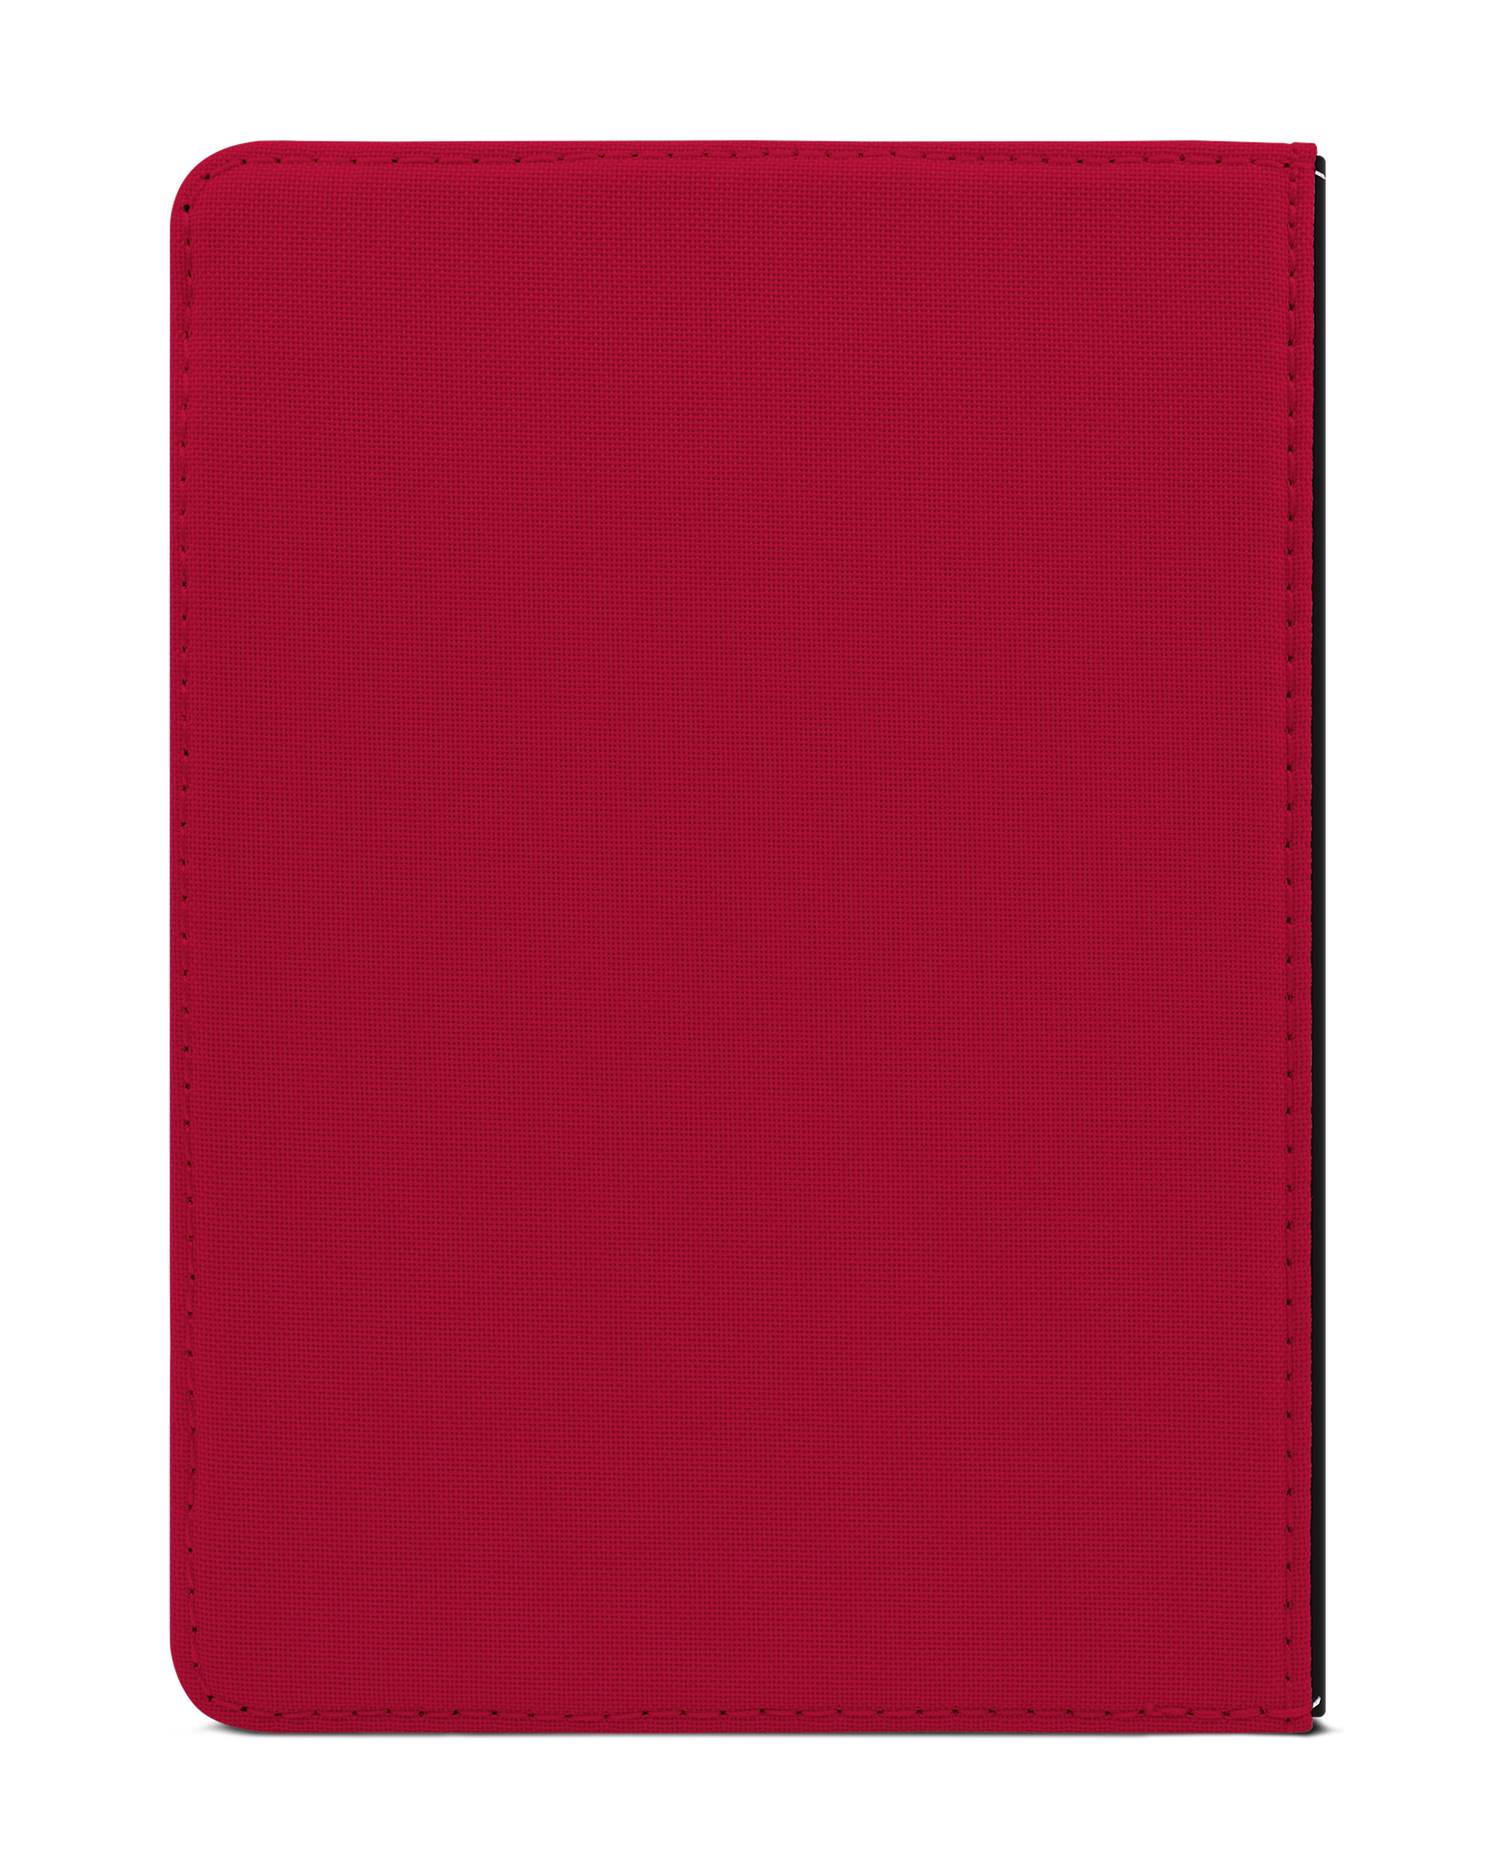 RED eReader Case for tolino vision 1 to 4 HD: Back View